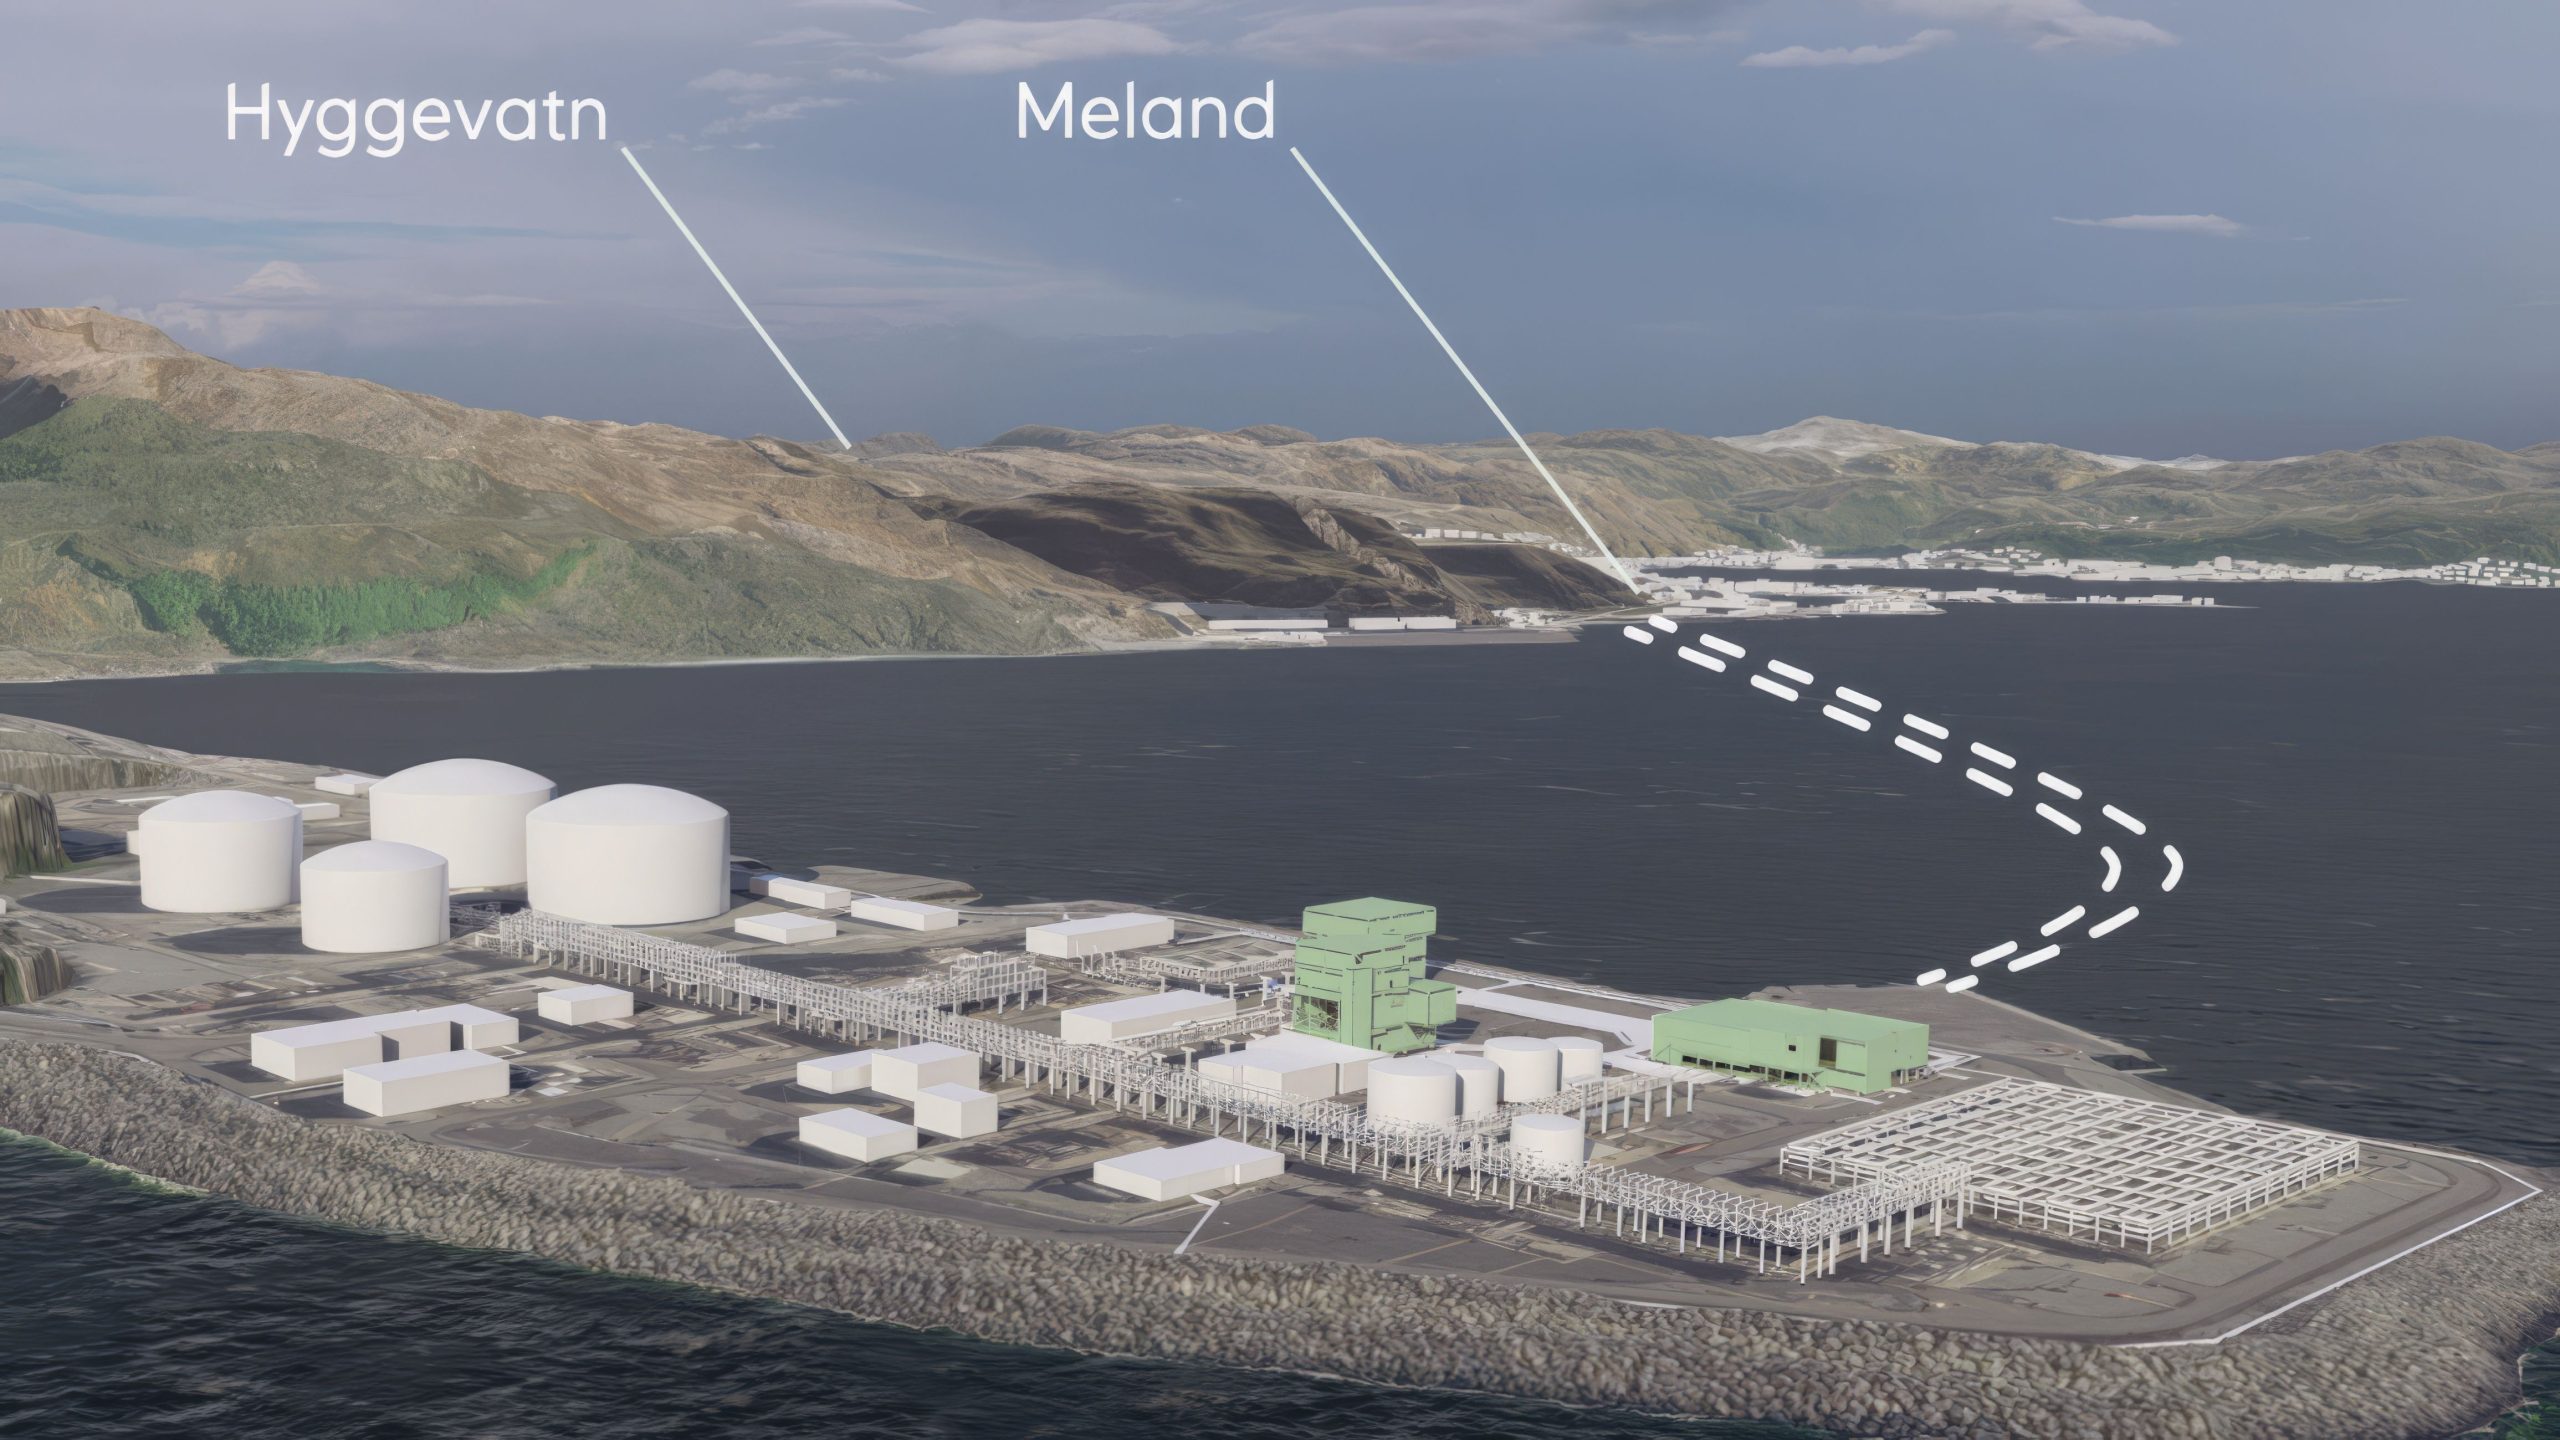 Norway’s Equinor awards Hammerfest LNG contract